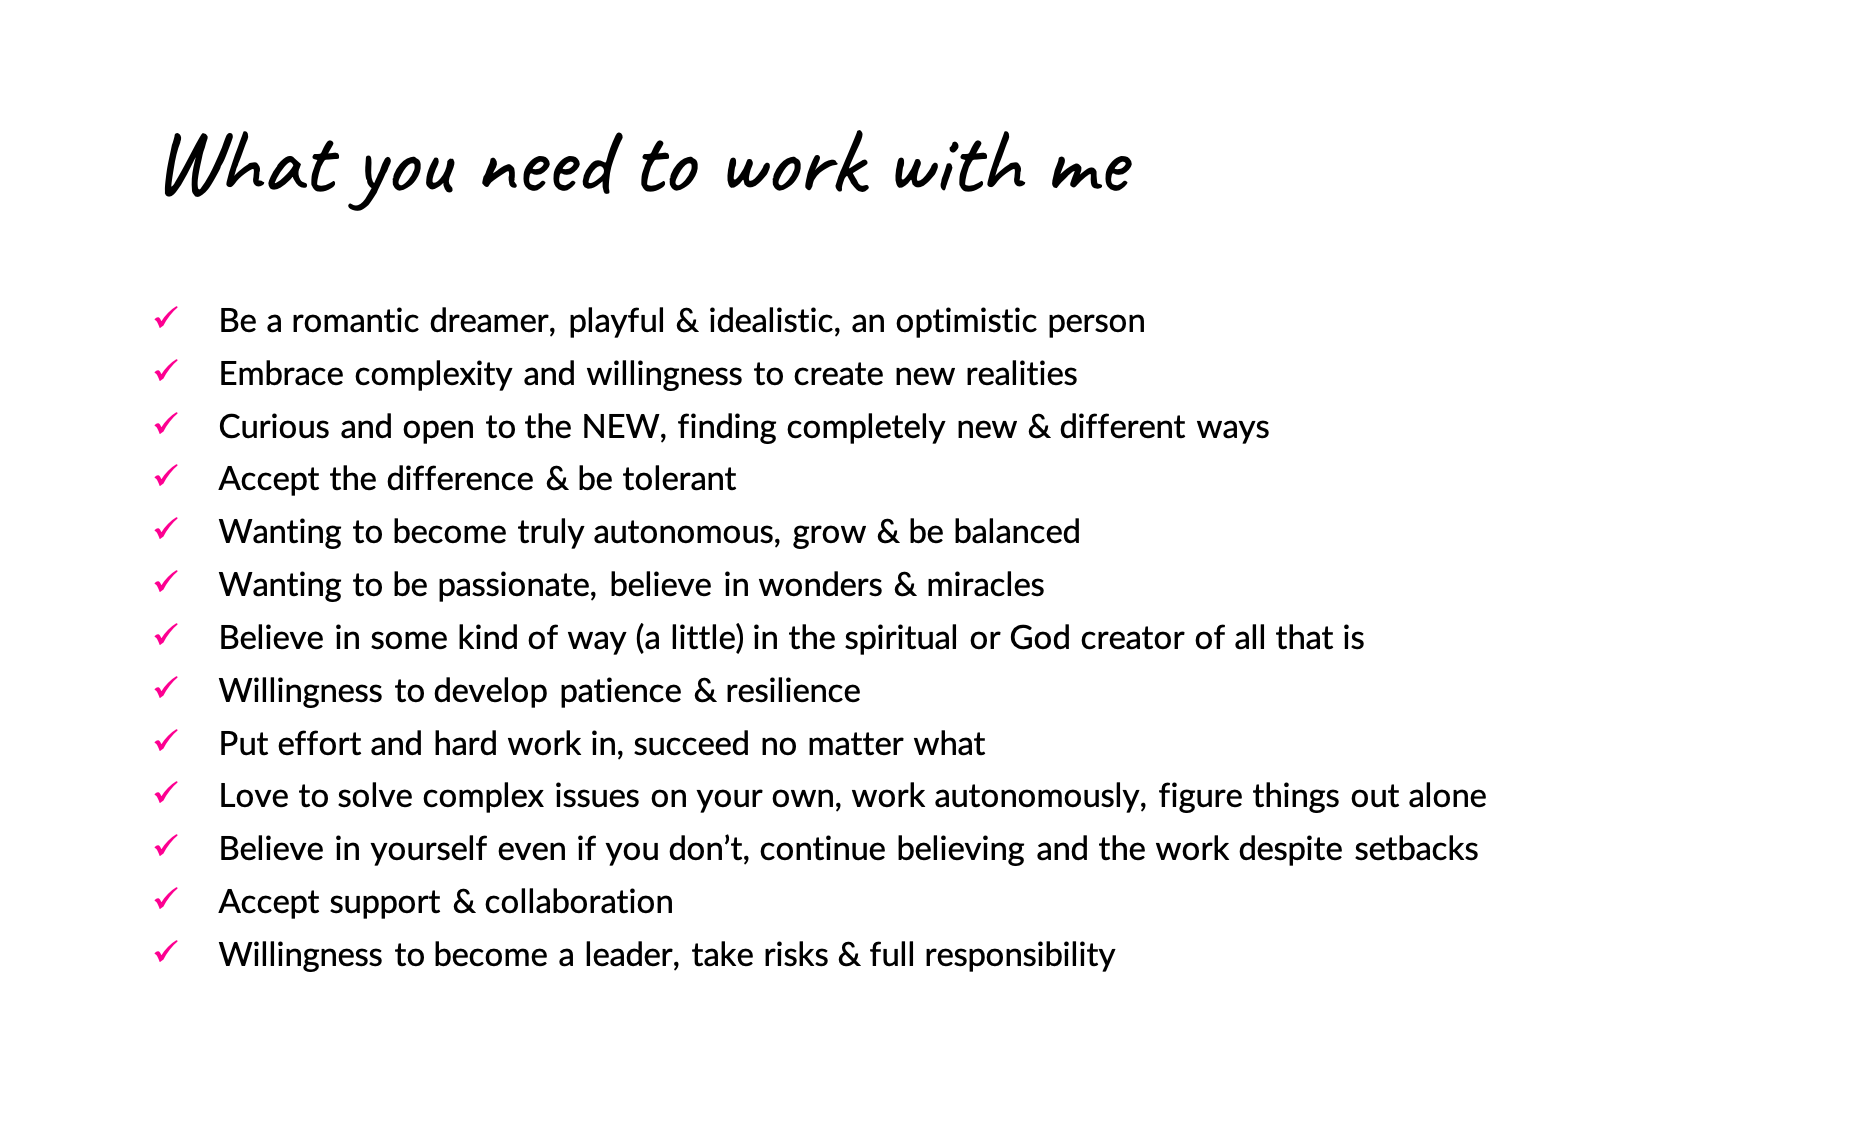 What you need when working with me_true love